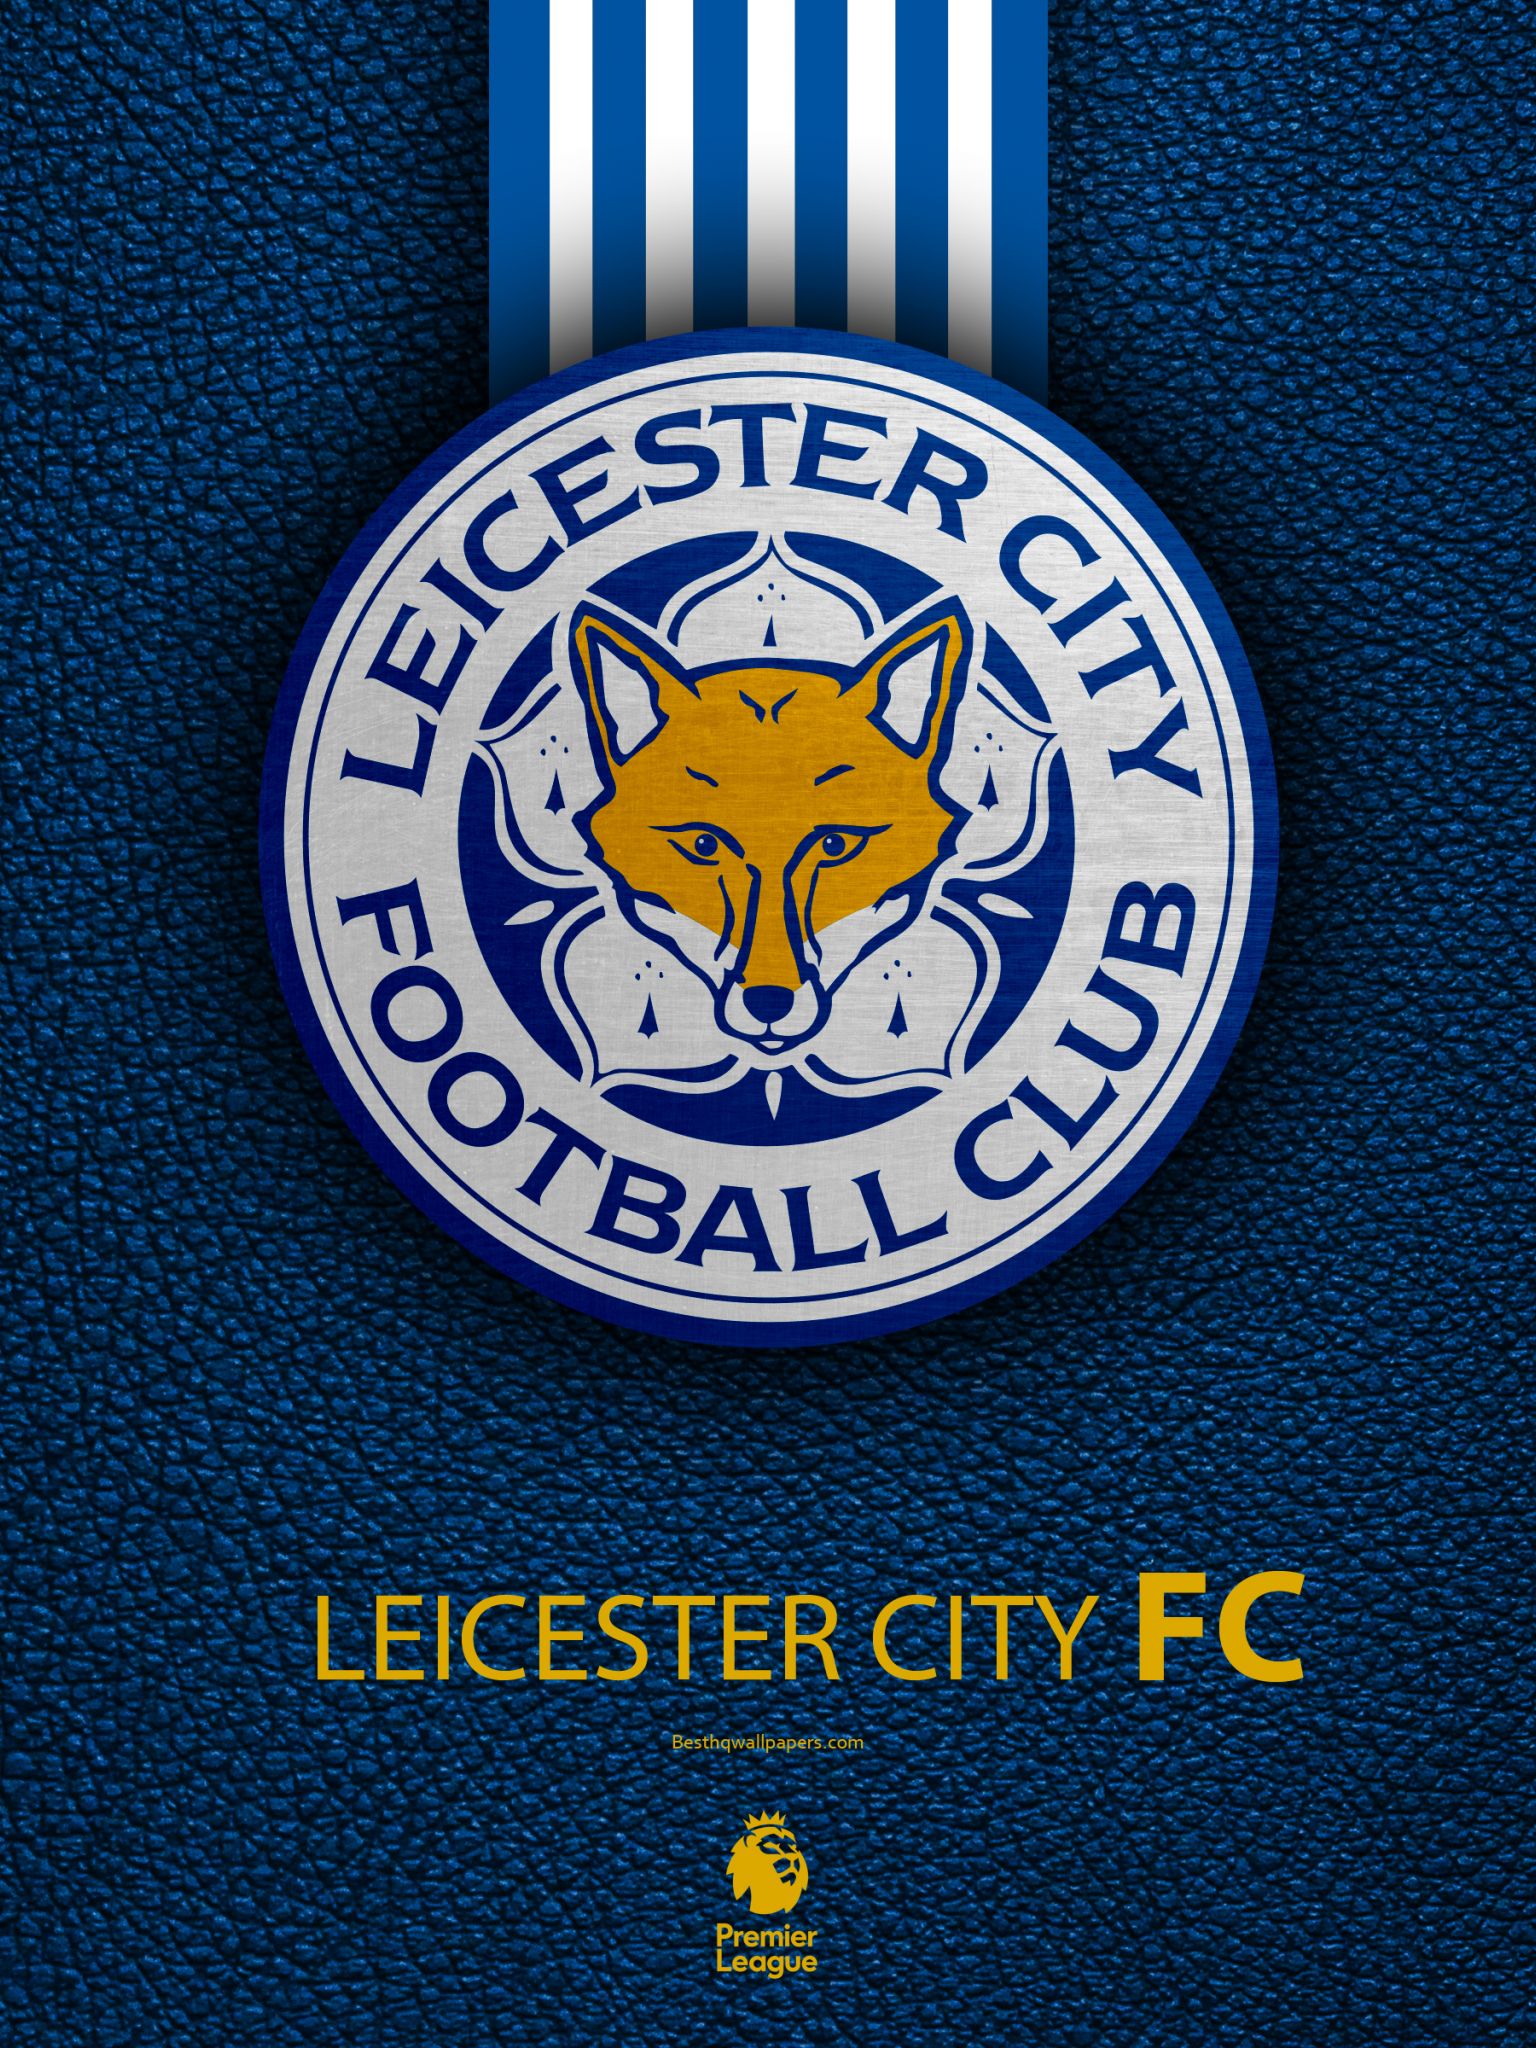 Free download Download wallpaper Leicester City FC 4k English football club [3840x2400] for your Desktop, Mobile & Tablet. Explore Leicester City F.C. Wallpaper. Leicester City F.C. Wallpaper, Manchester City